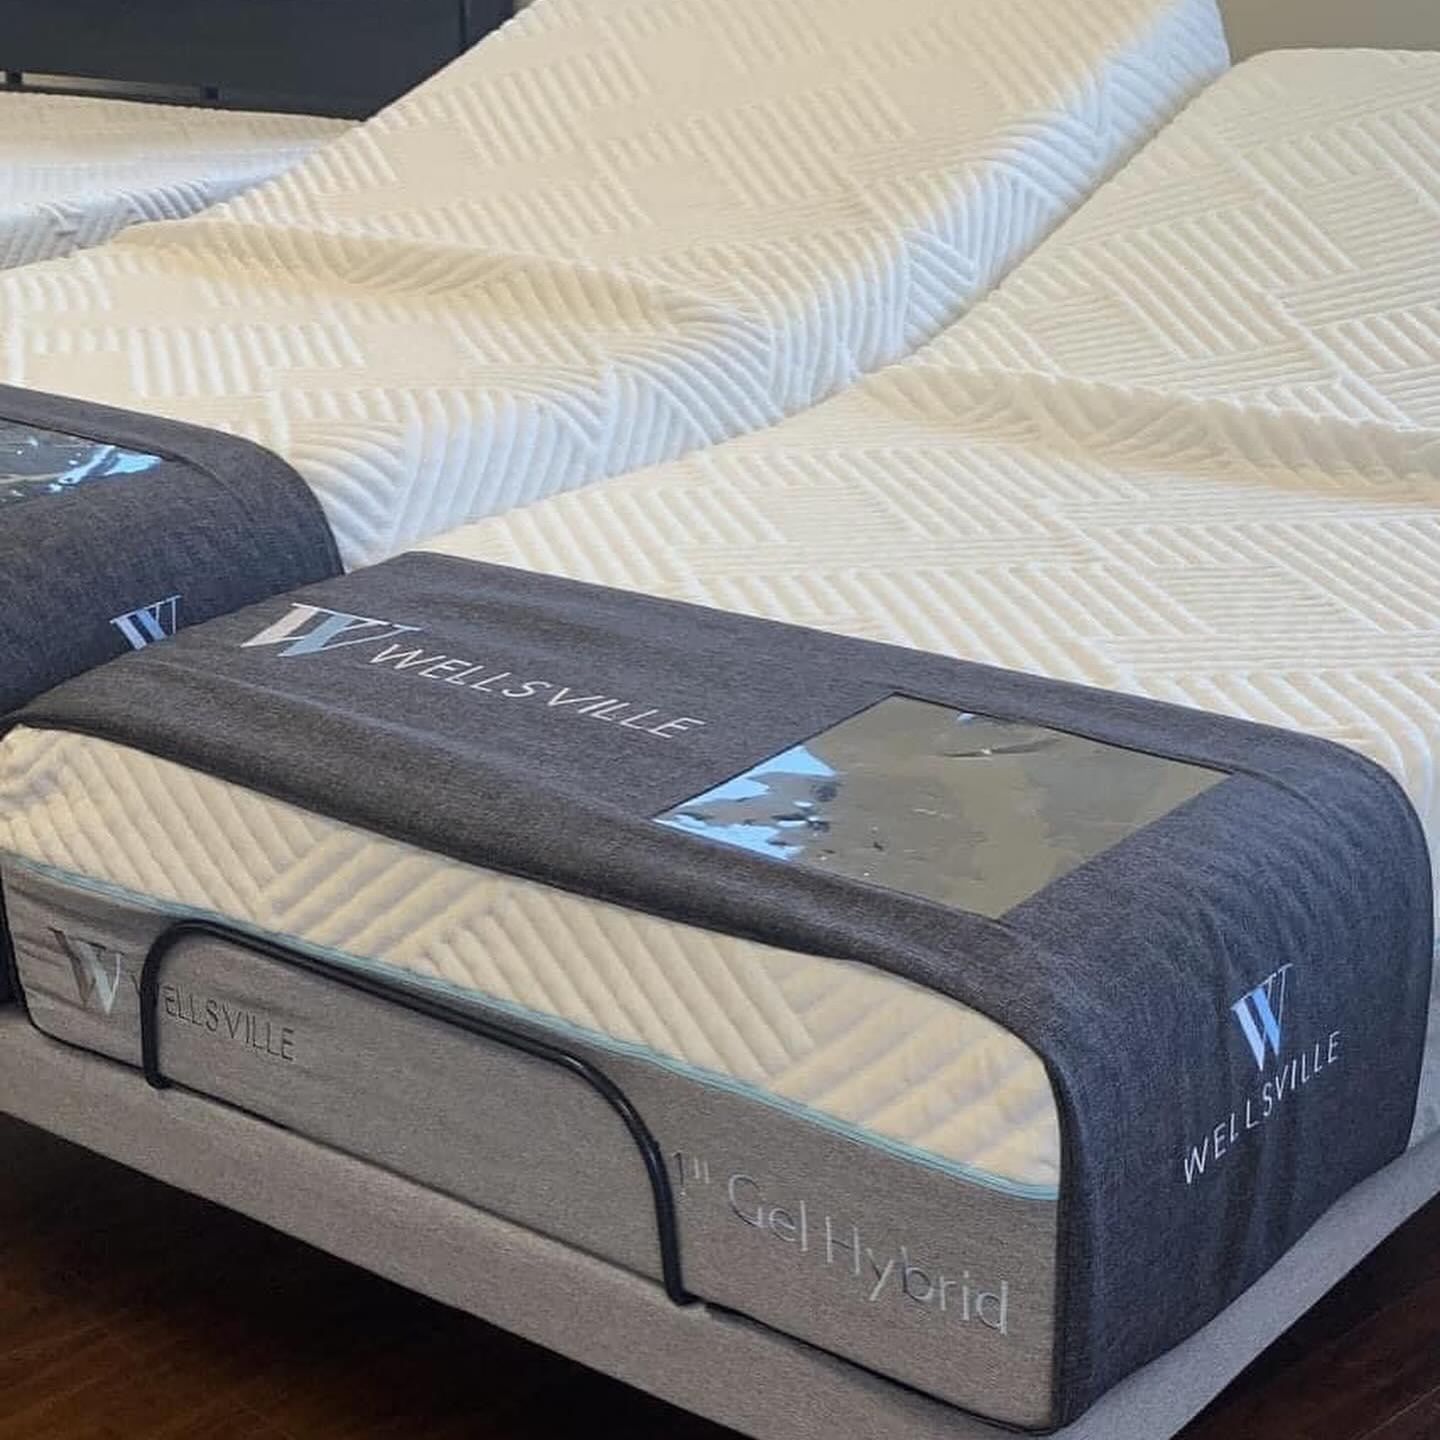 Adjustable Base Packages With Mattress!! Queen And King Brand New!!